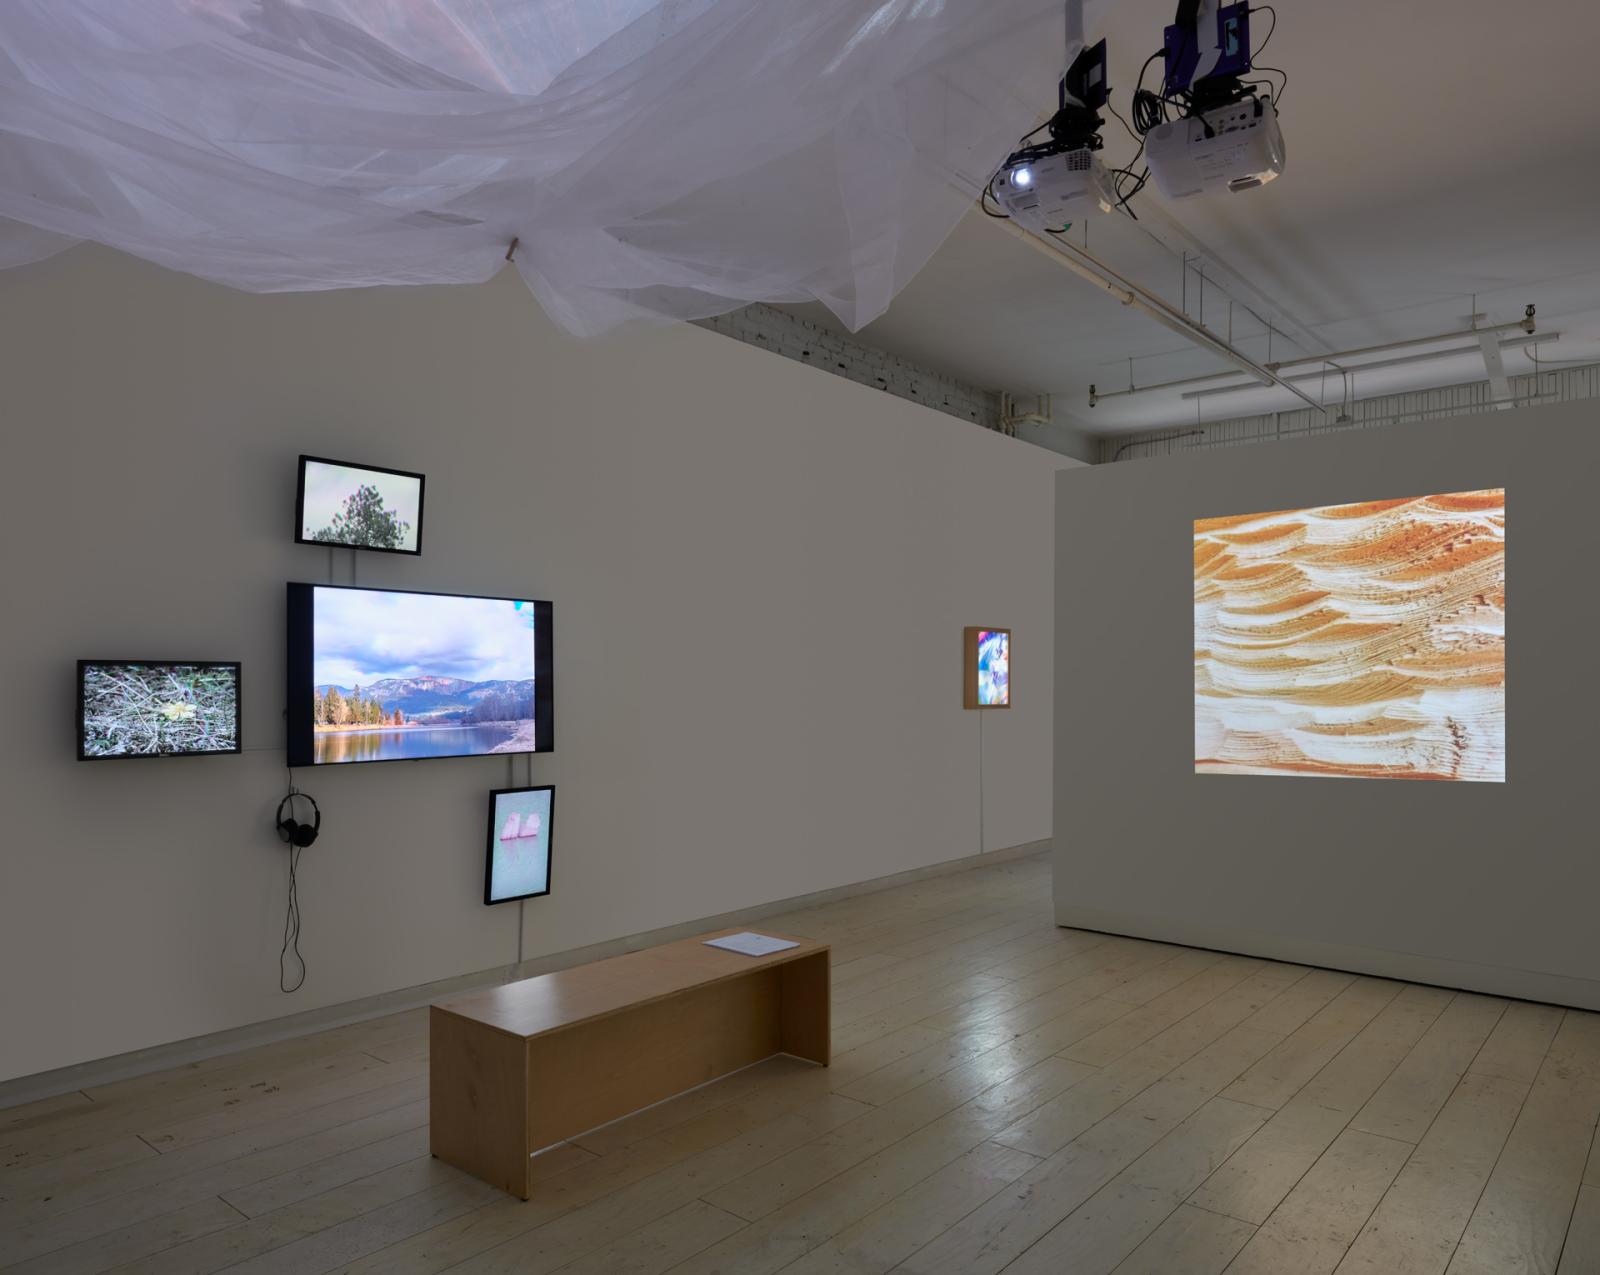 Three quarter installation view of gallery installation. On left wall is a four channel video installation of landscapes in vivid colour, on the right is a single projection of a carved blonde wood.